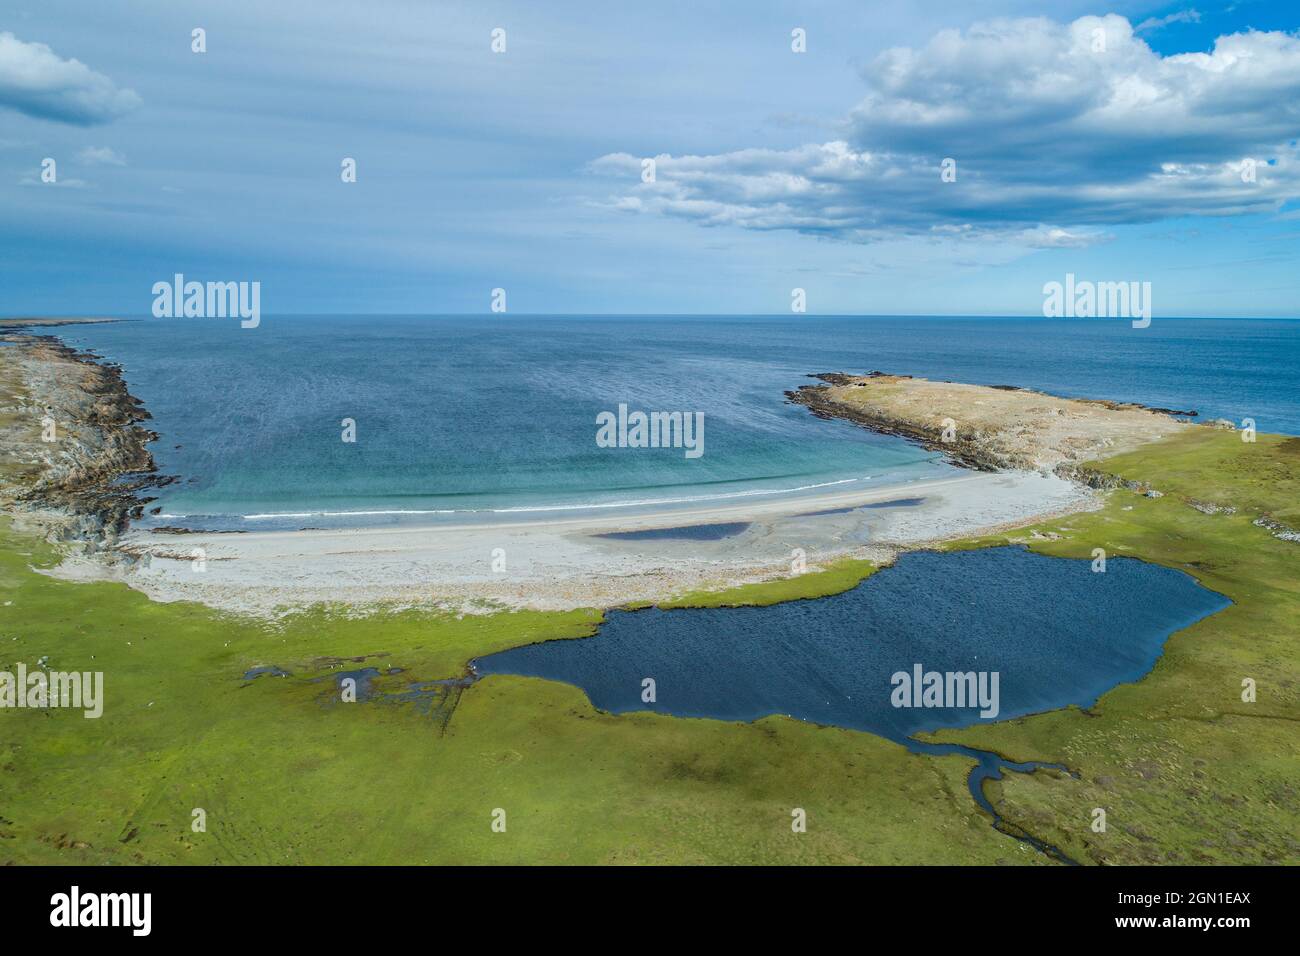 Aerial view of the beach and bay, near Stanley, Falkland Islands, British Overseas Territory, South America Stock Photo